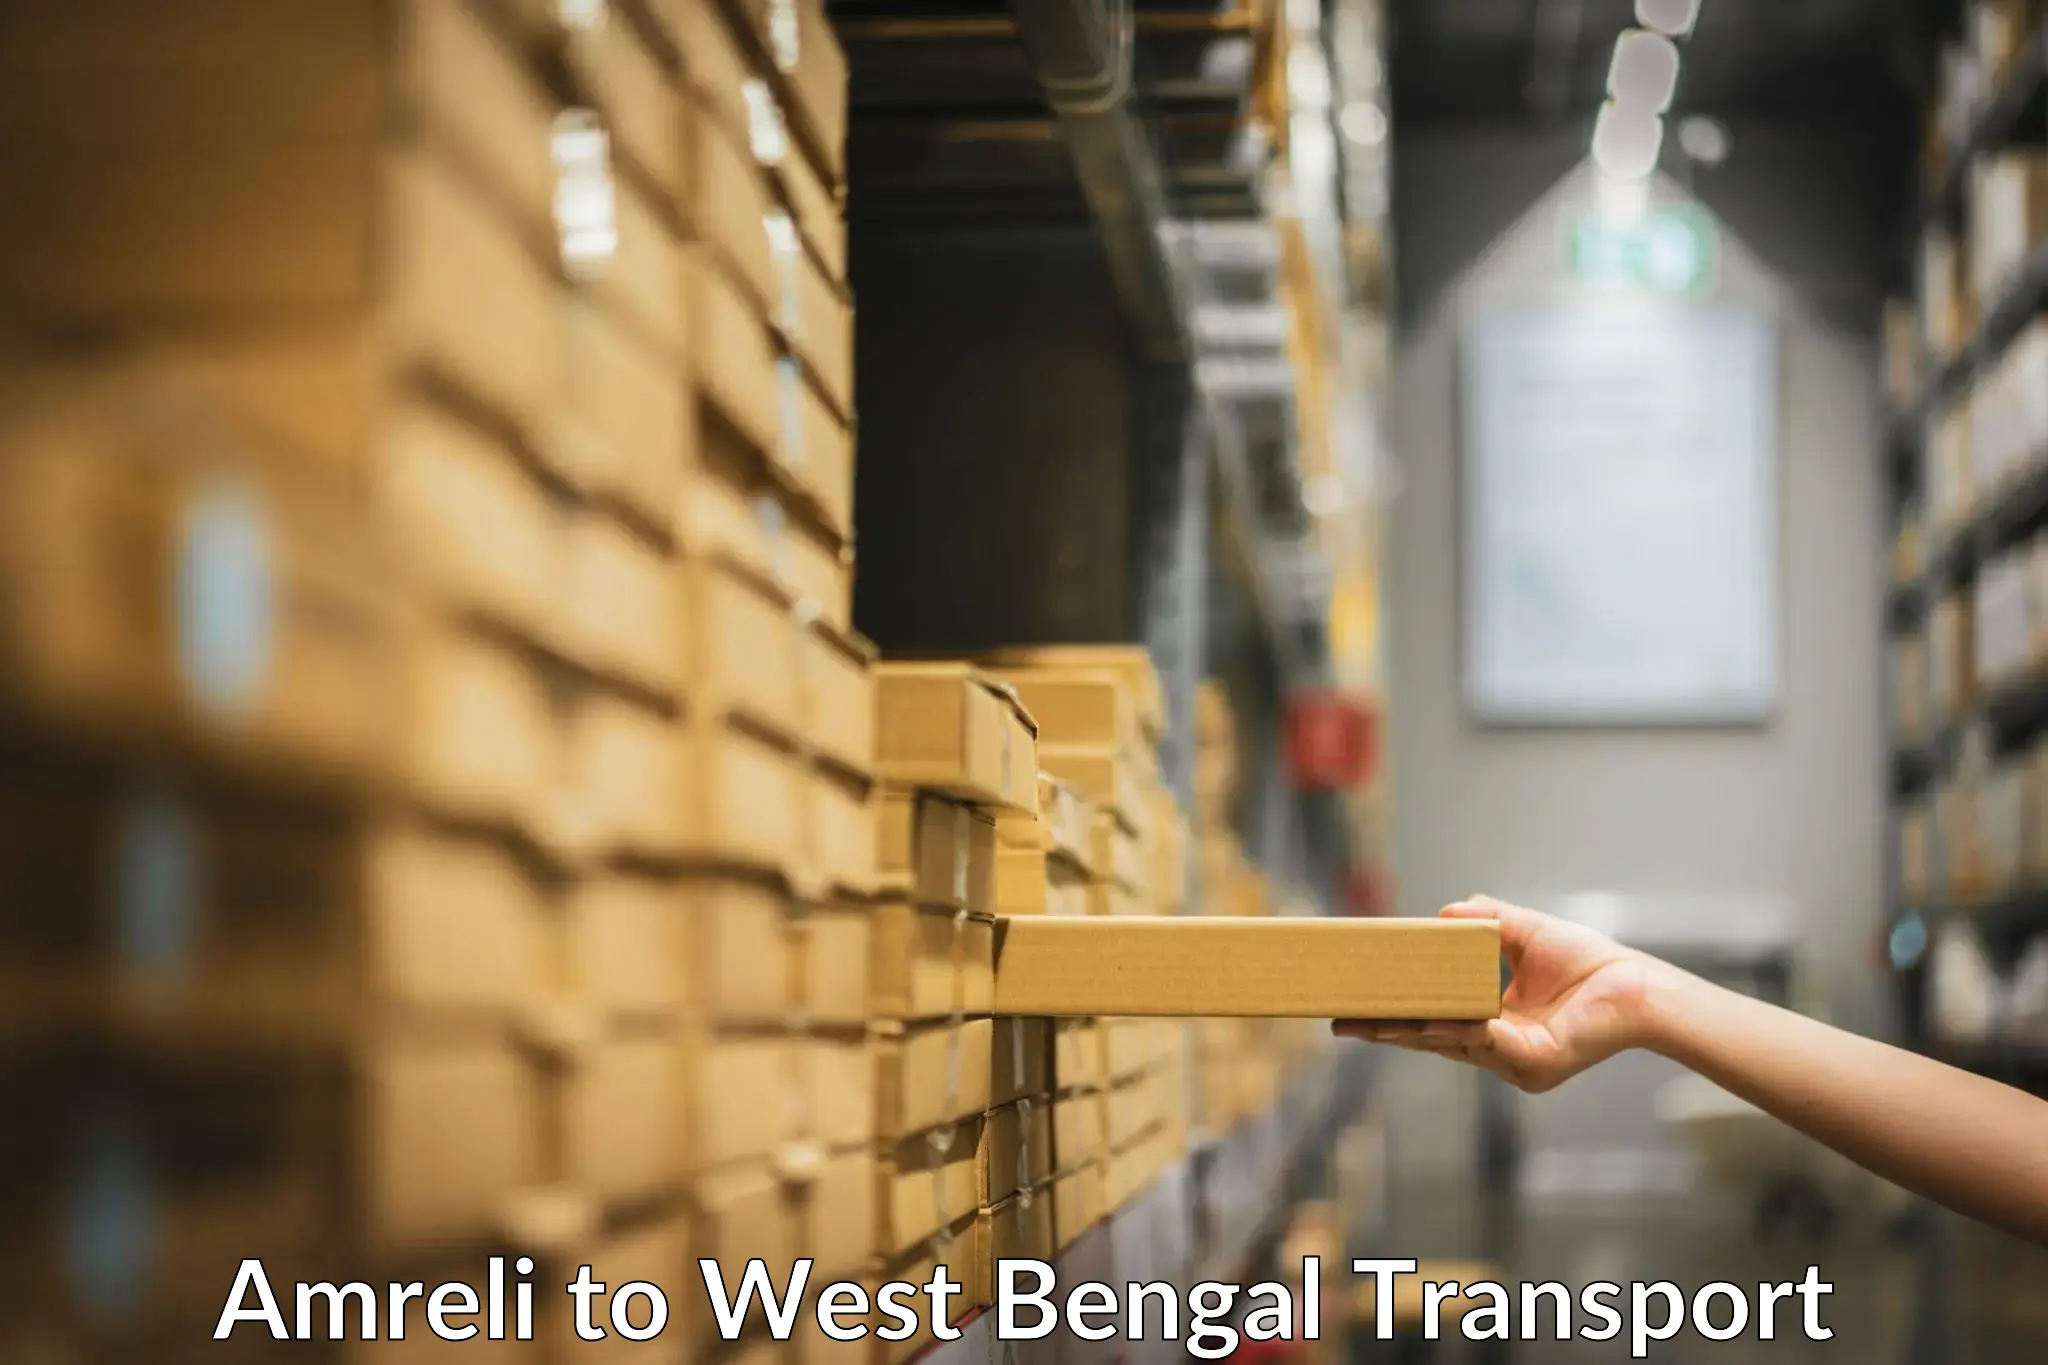 Truck transport companies in India Amreli to Budge Budge